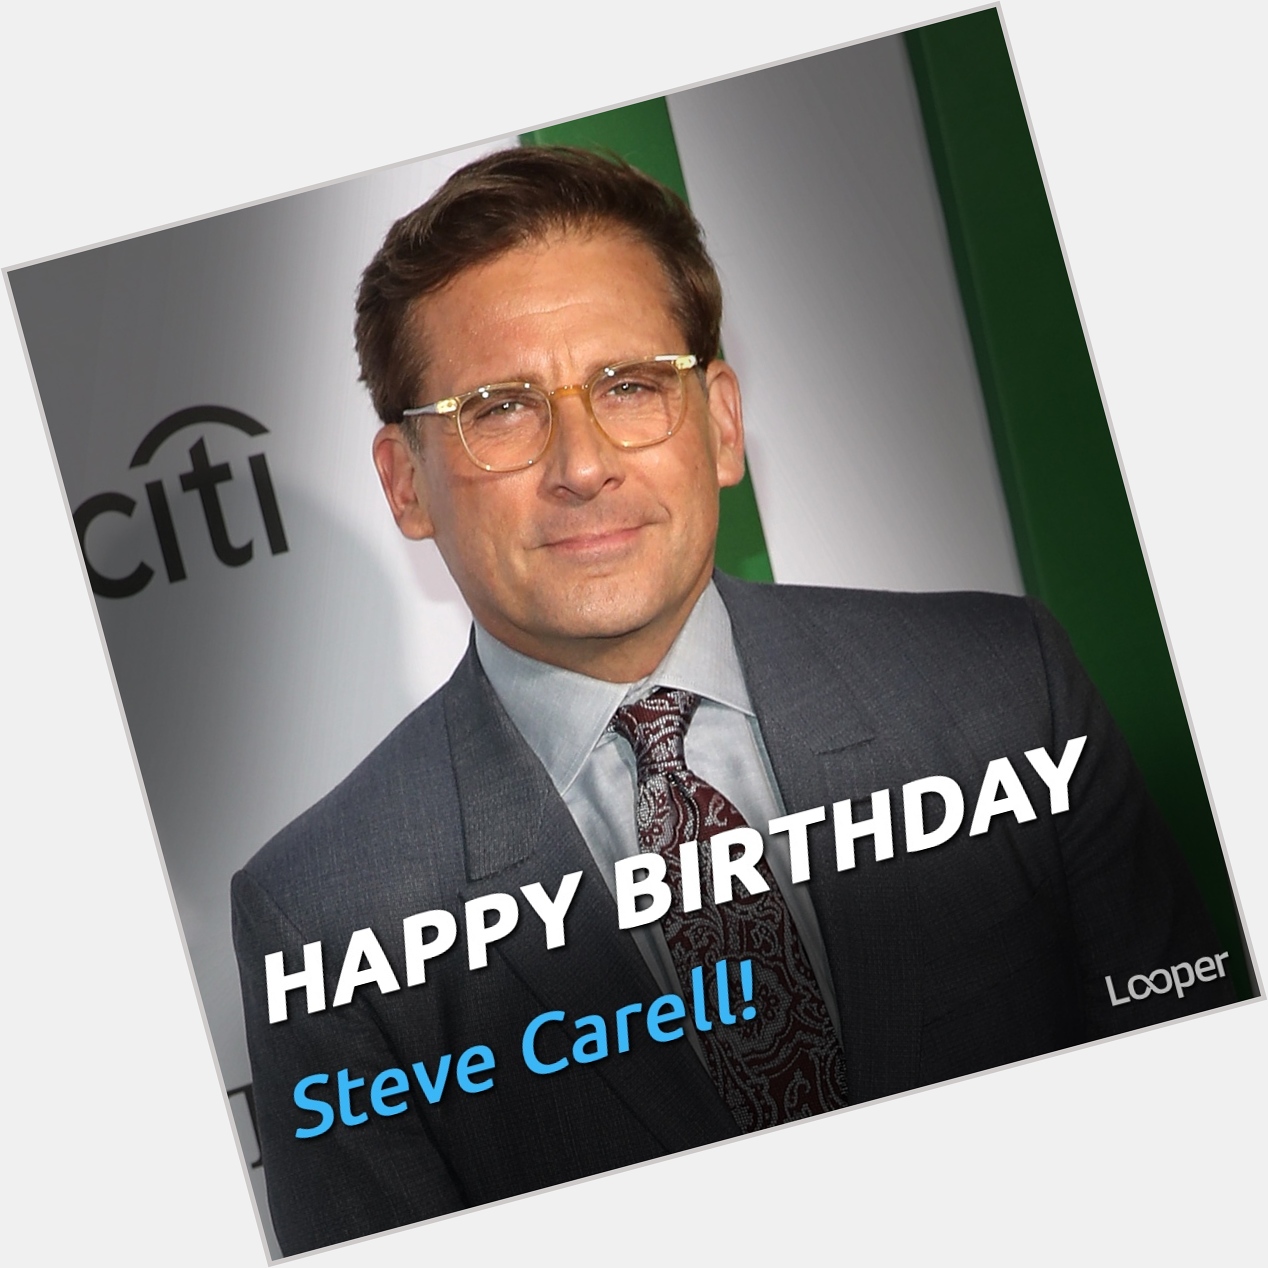 Happy Birthday, Steve Carell!

What is your favorite movie/TV show? 